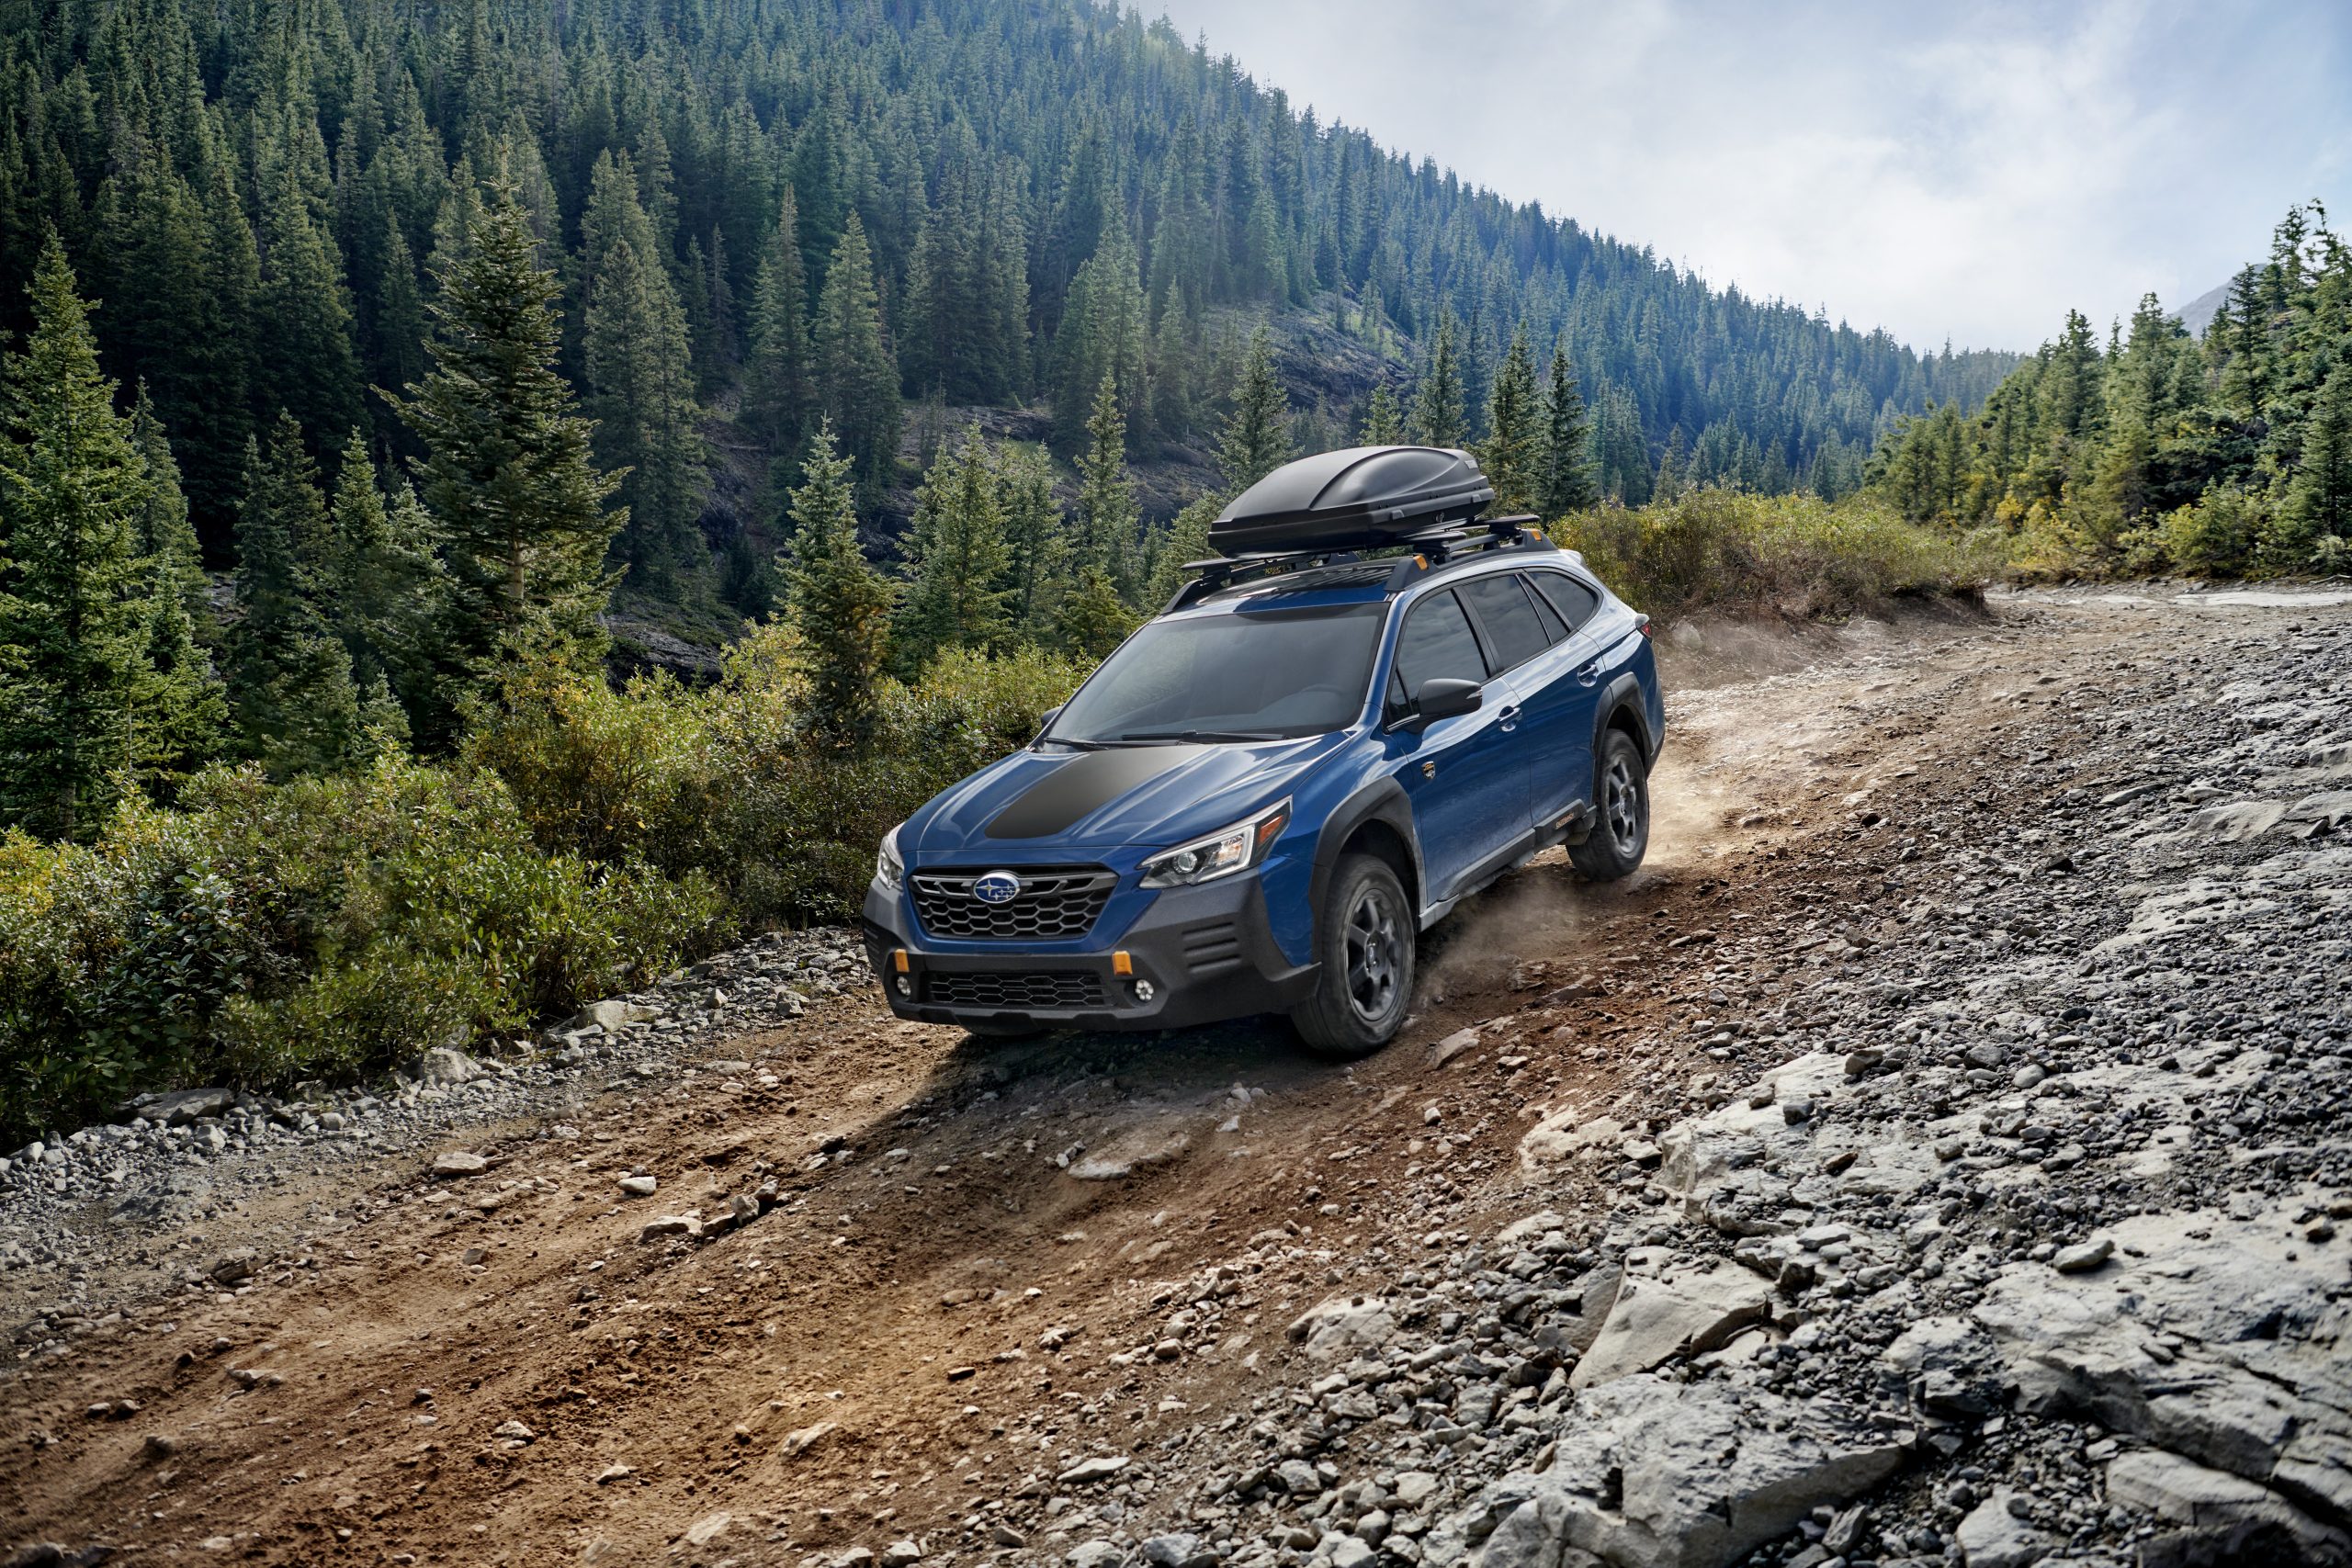 Subaru Introduces New 2022 Outback Wilderness Edition with an Off-Road Focus Roof Rack For 2022 Subaru Outback Wilderness